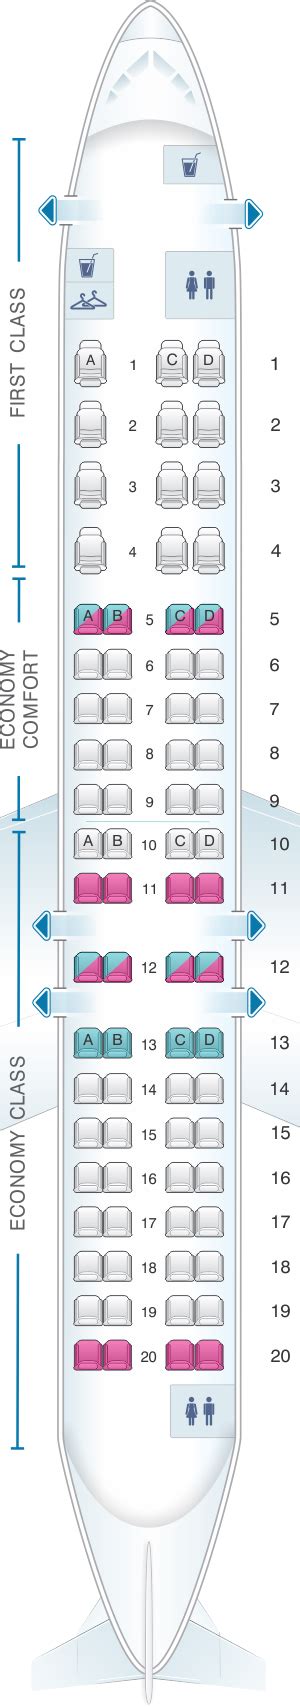 For your next American Airlines flight, use this seating chart to get the most comfortable seats, legroom, and recline on . Seat Maps; Airlines; Cheap Flights; Comparison Charts. Short-haul Economy Class ... Bombardier CRJ-900 (CR9) Layout 2; Bombardier CRJ-900 (CR9) Layout 3; Embraer ERJ-140 (ERD) Embraer ERJ-145 (ER4) Embraer ERJ-175 (E75 .... 